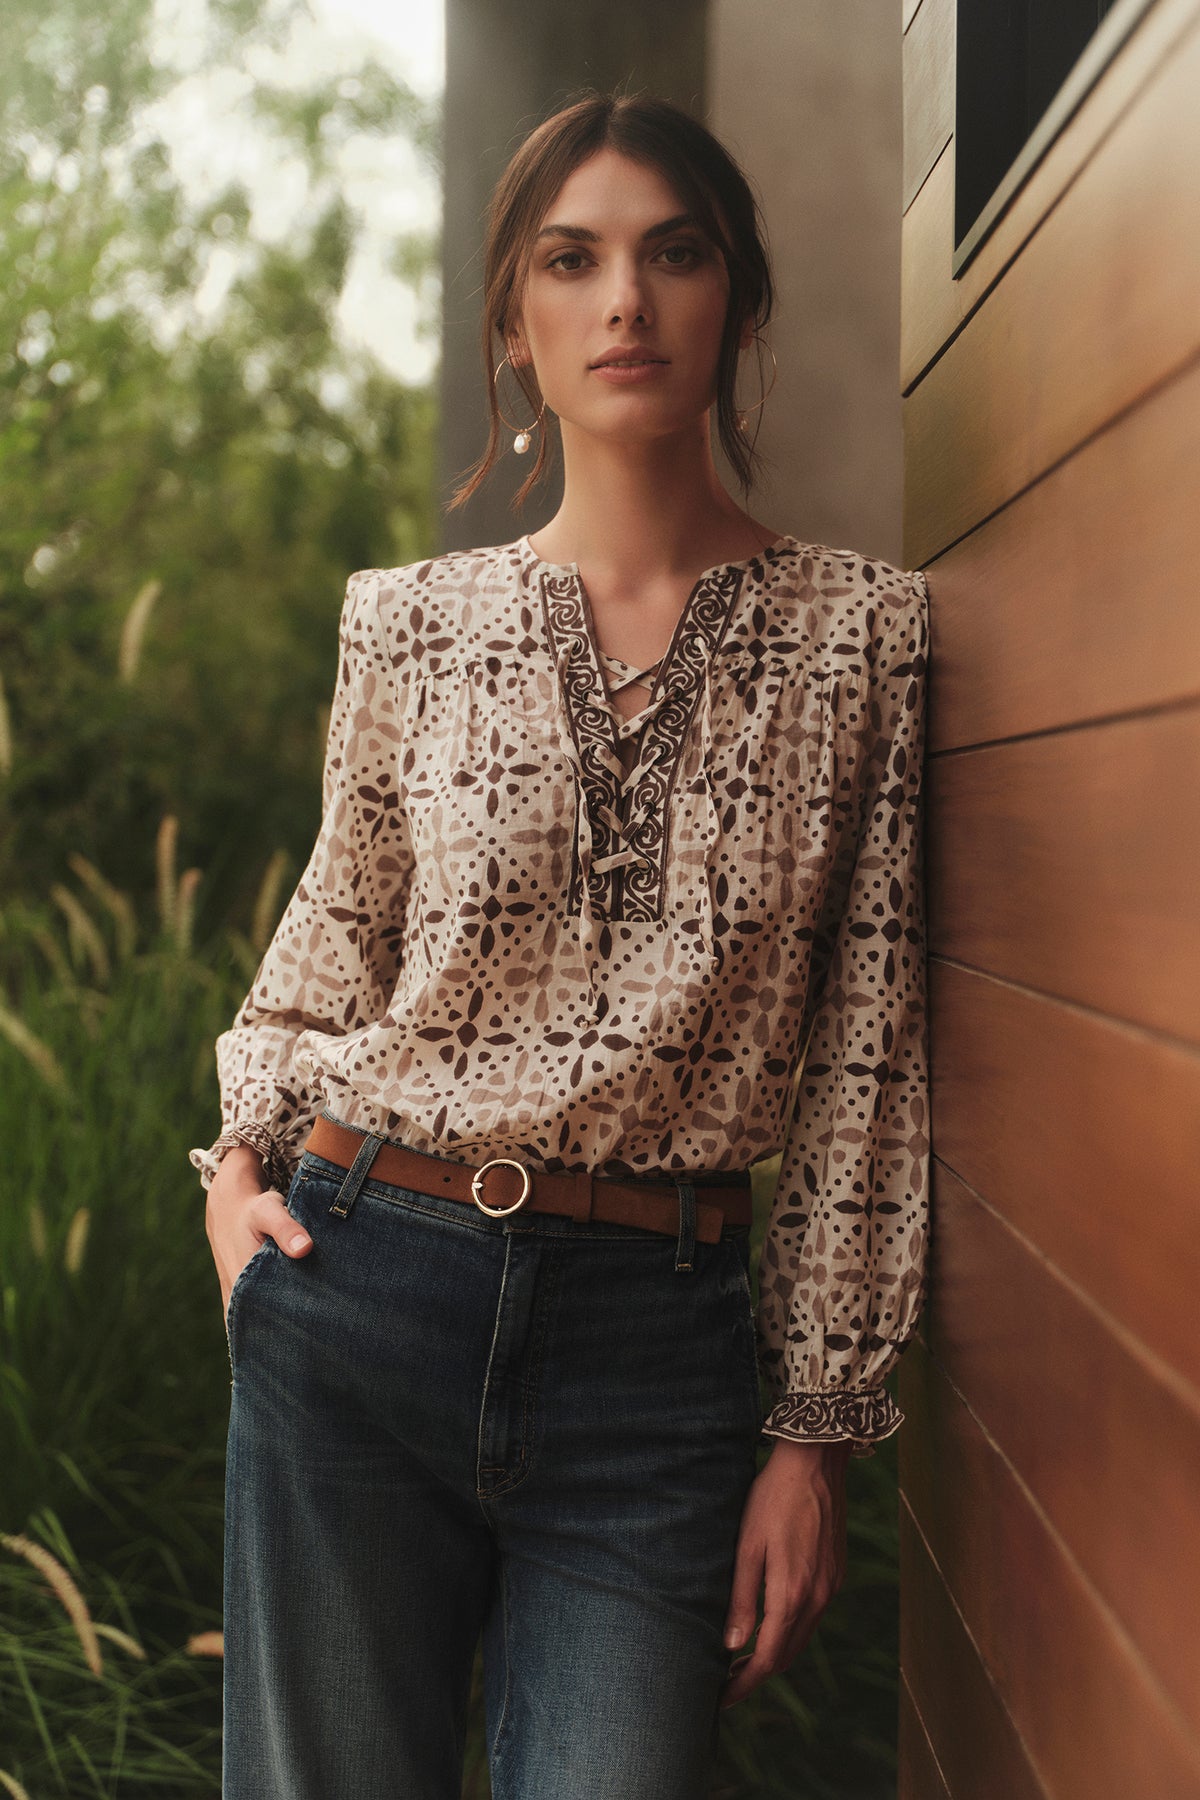   A woman wearing jeans and a blouse leaning against a wall, accessorized with COCO HOOP EARRINGS BY BYCHARI. 